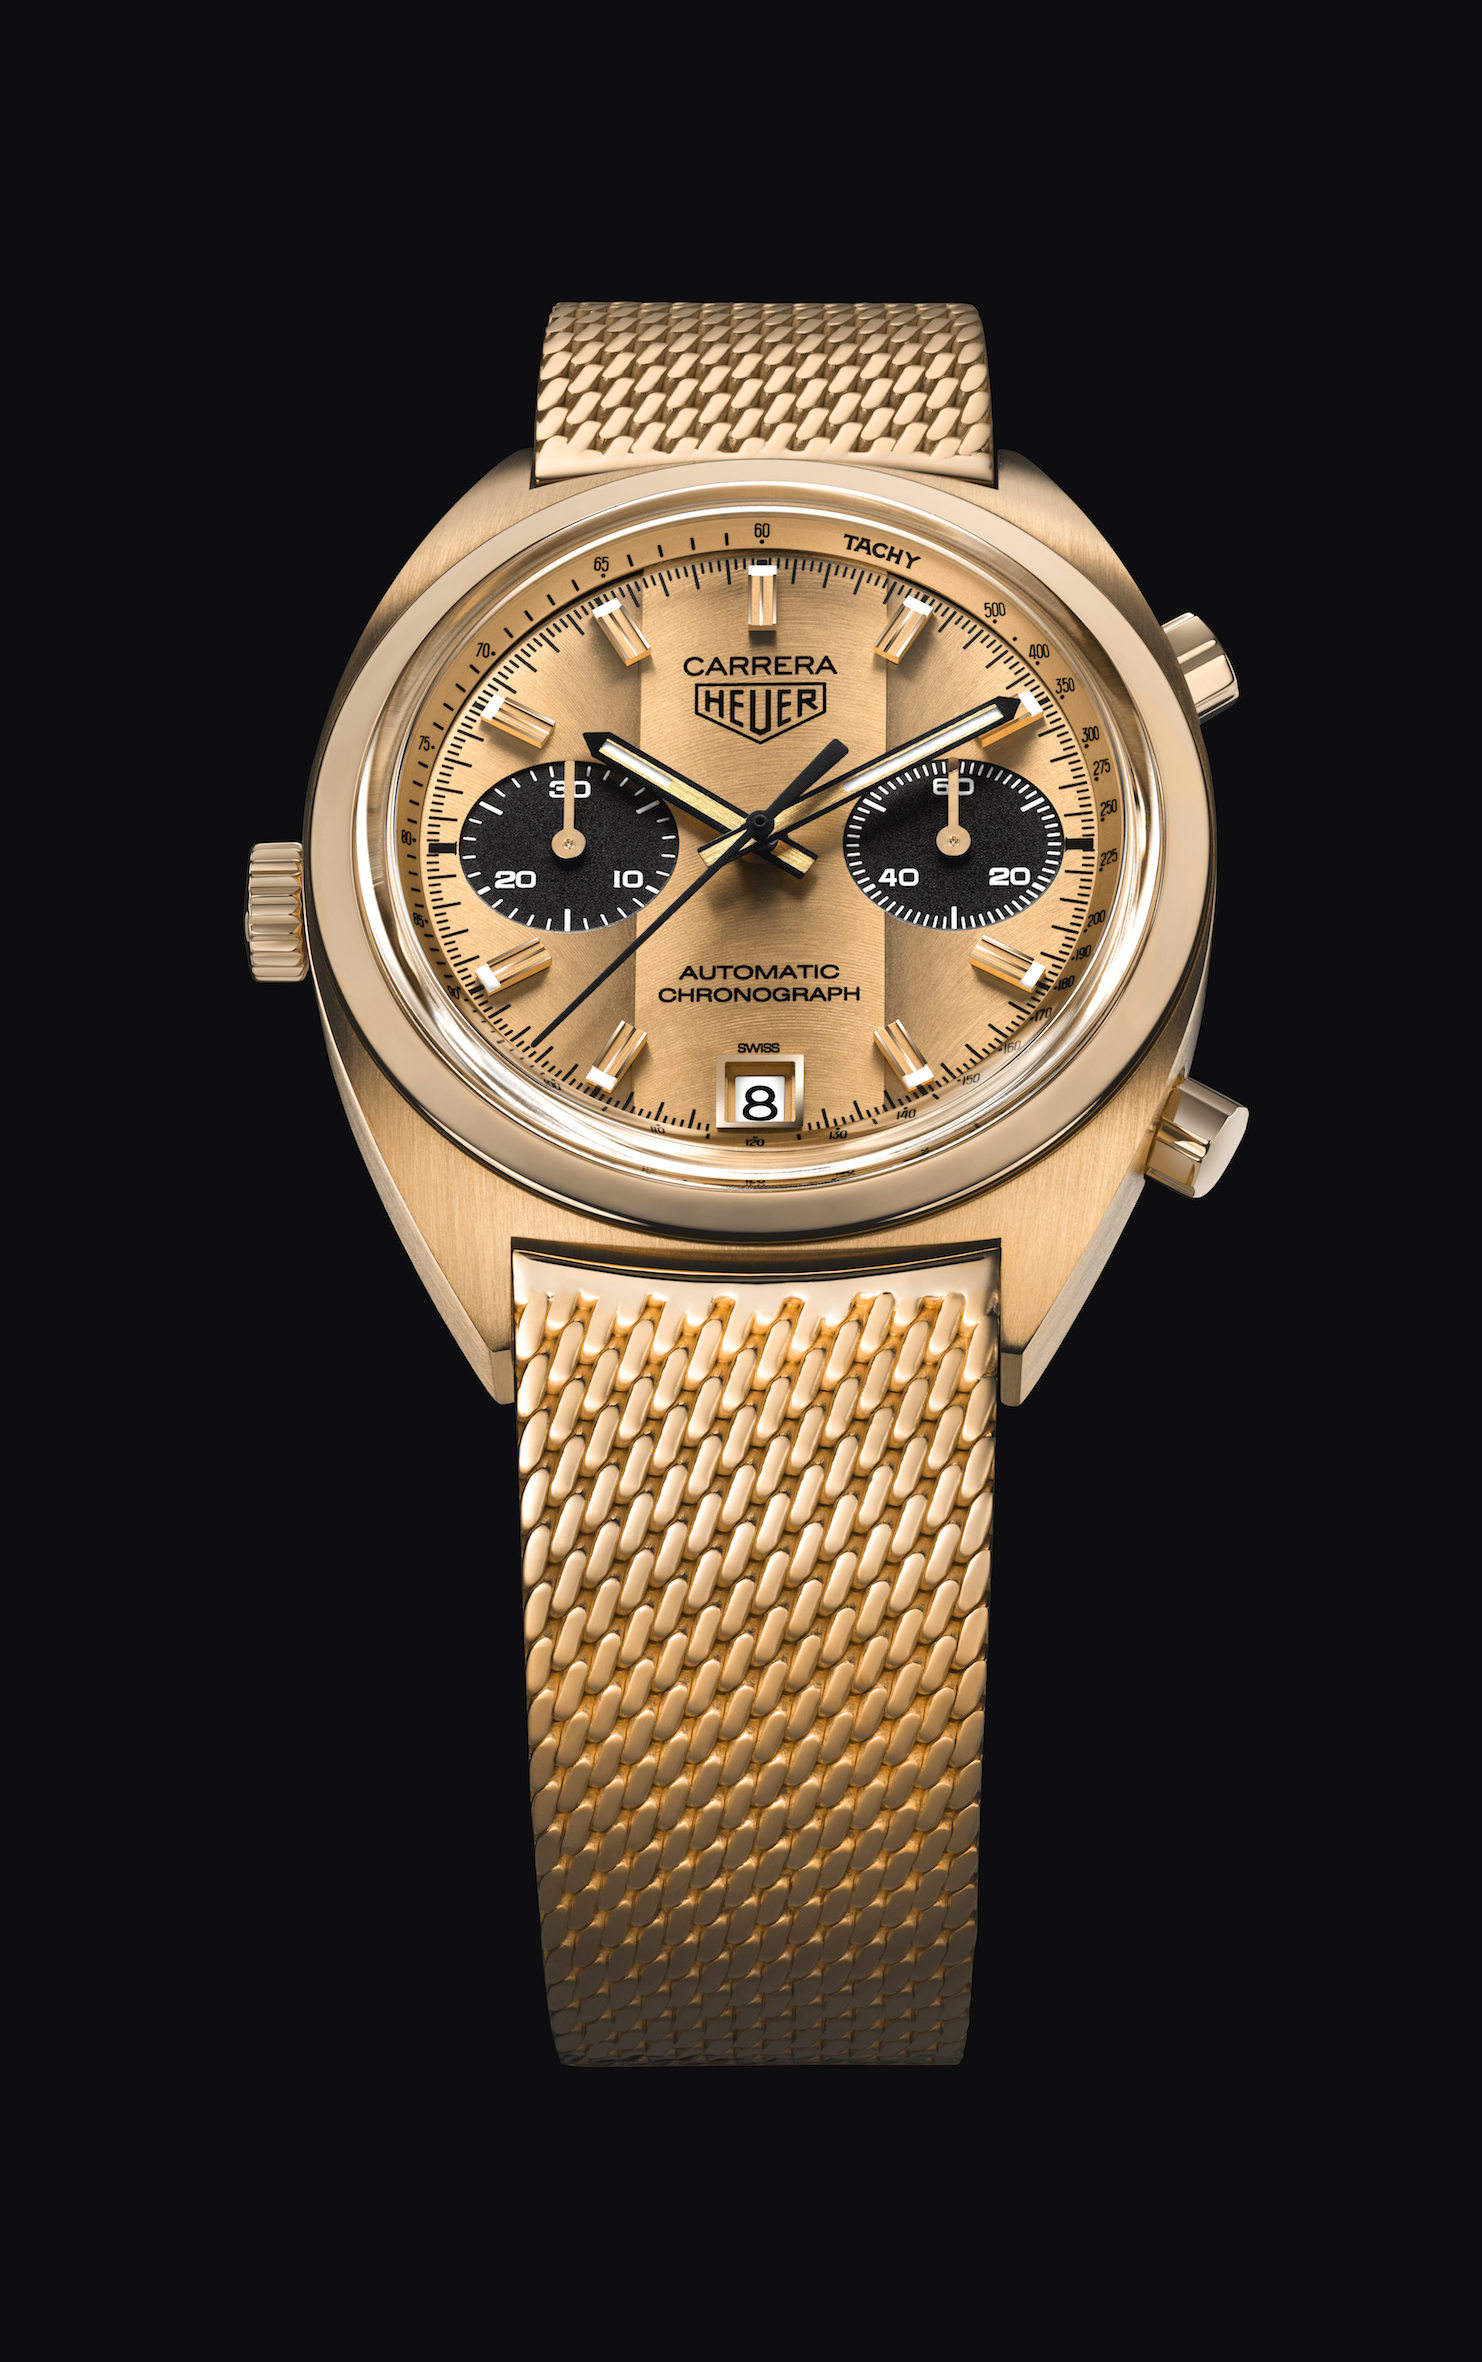 The 2018 replica timepiece shows the same characteristics as the piece of 1972